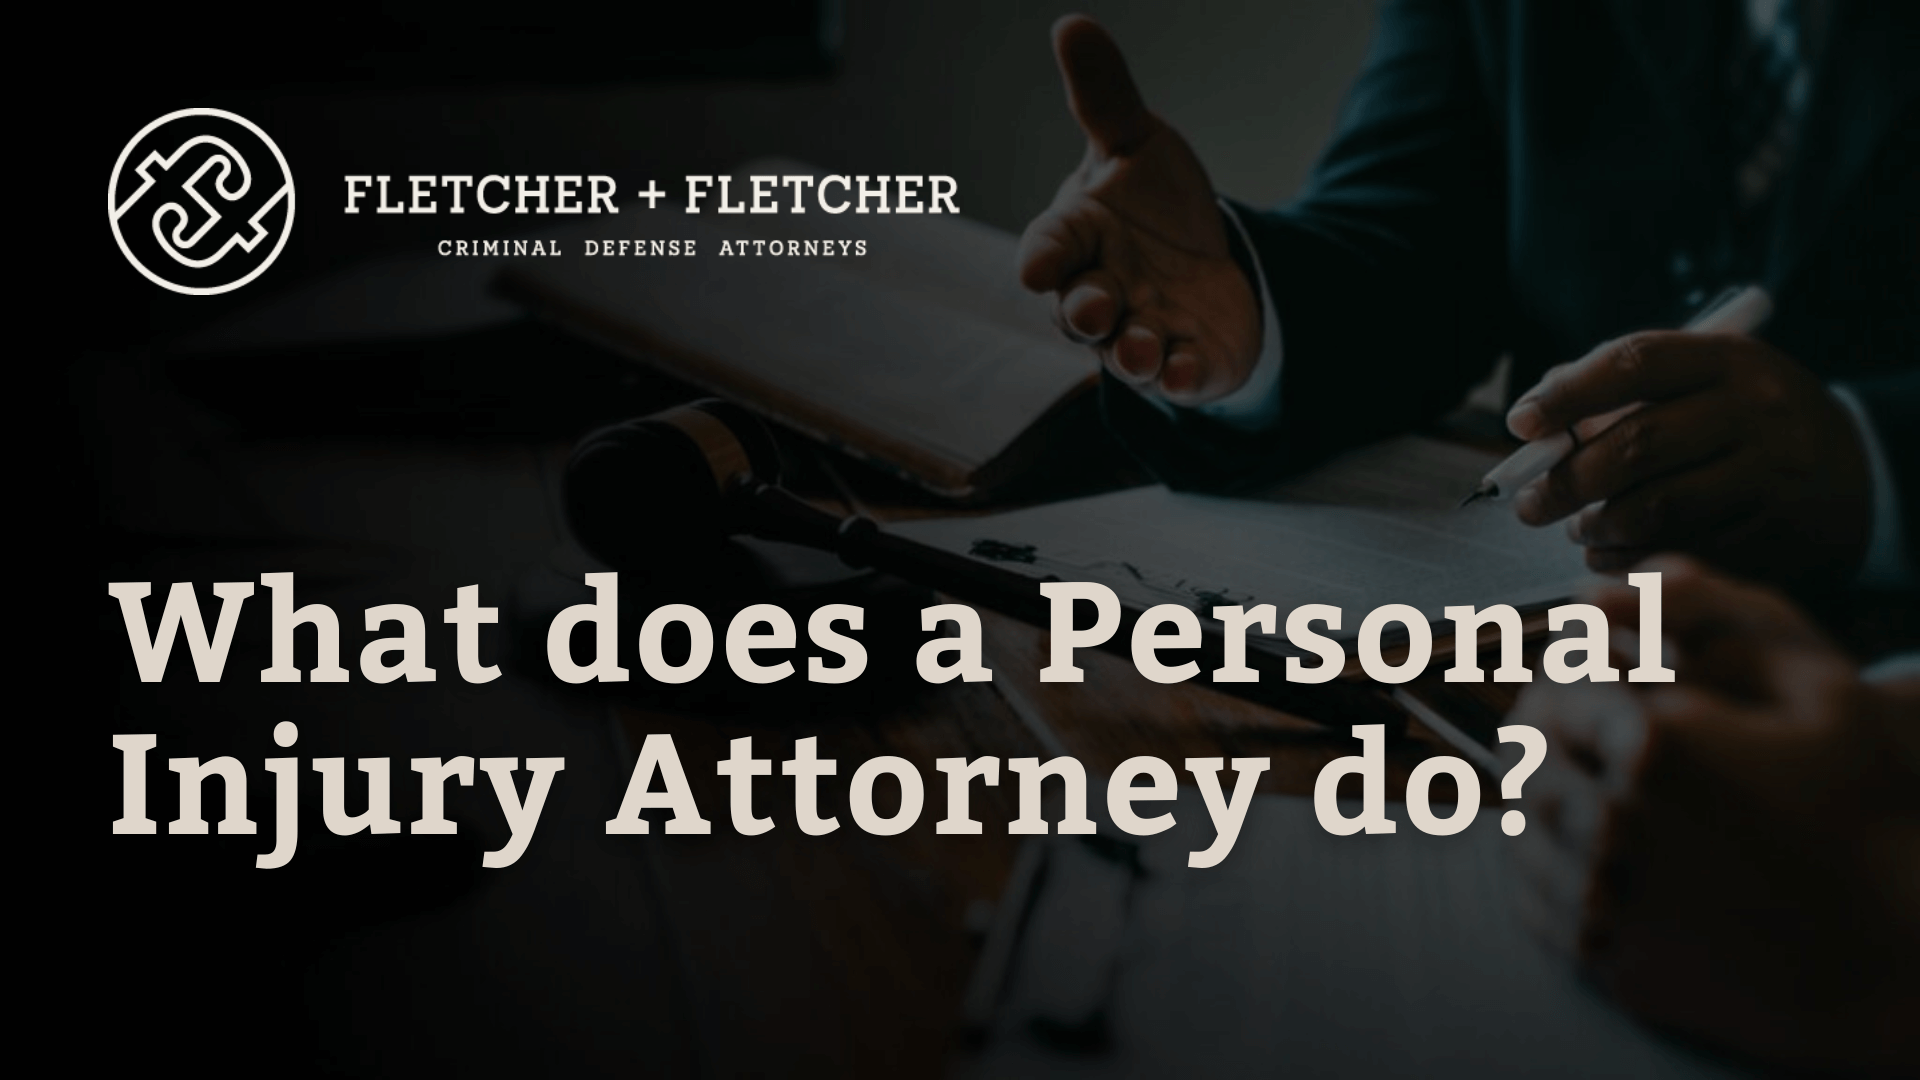 What does a Personal Injury Attorney do - Fletcher Fletcher Florida criminal defense lawyers